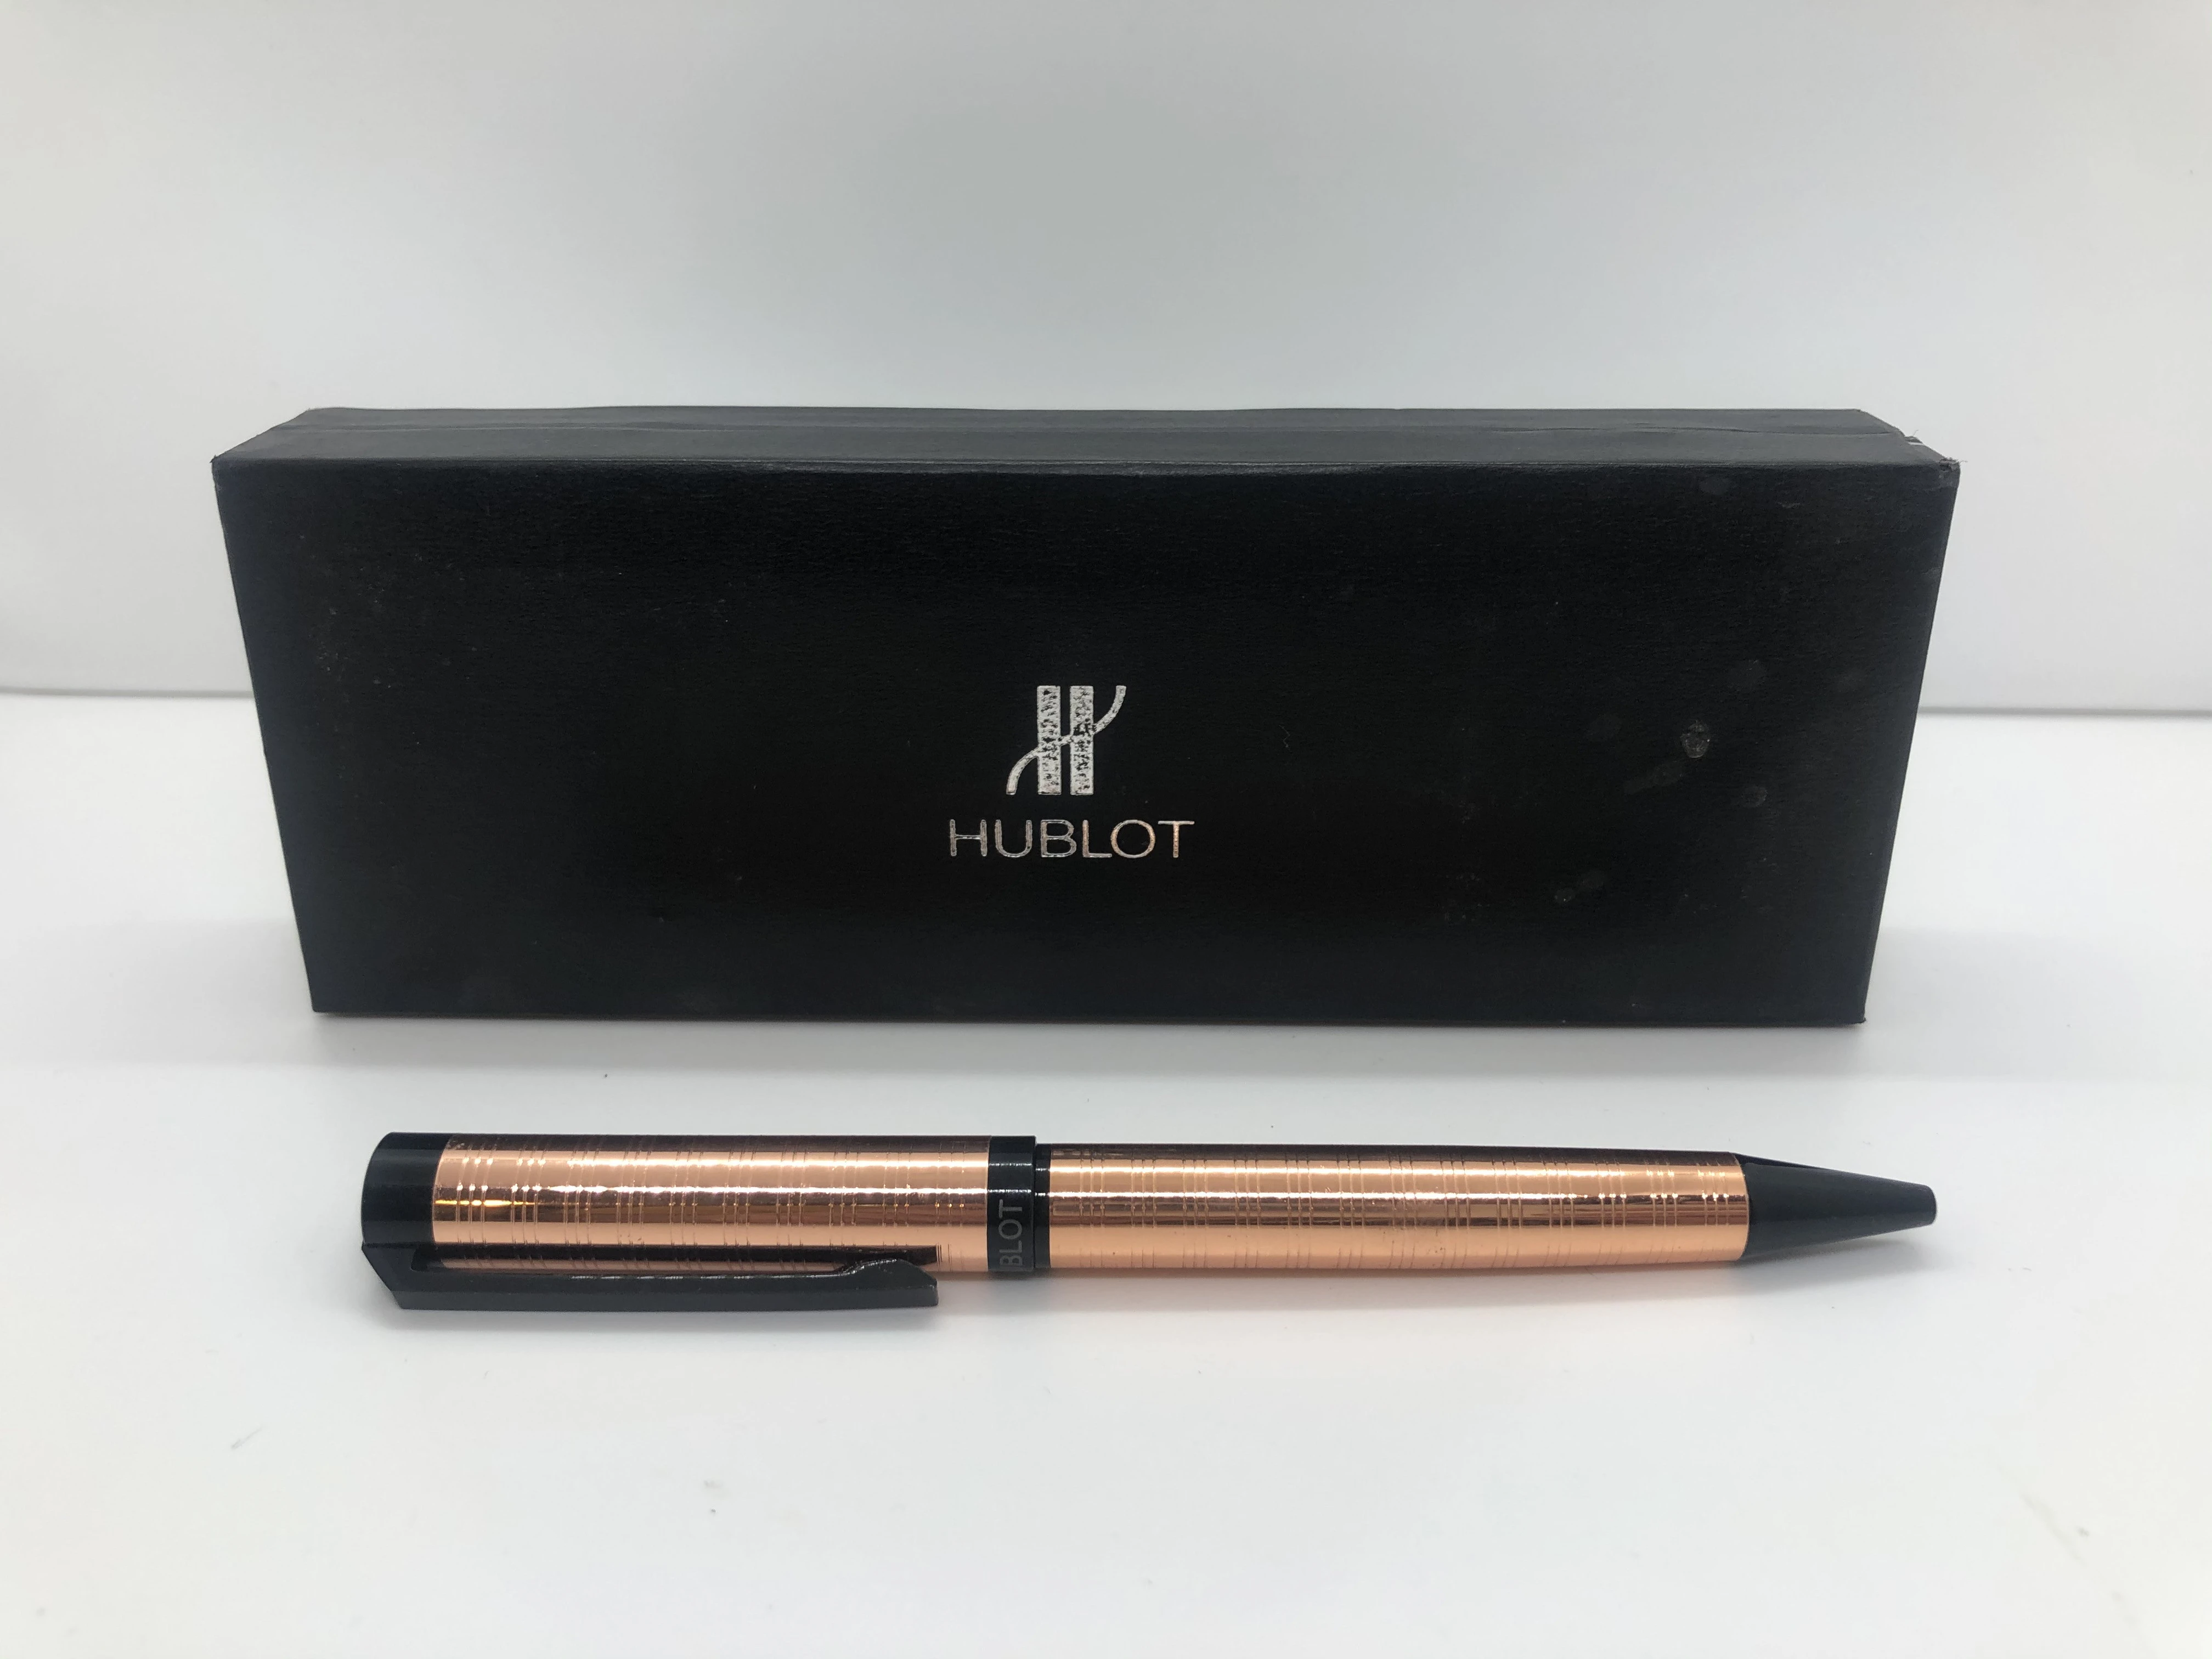 Black Hublot Pen * Rose Gold - with engraved touches - with the brand's logo on top and engraved in the rotation